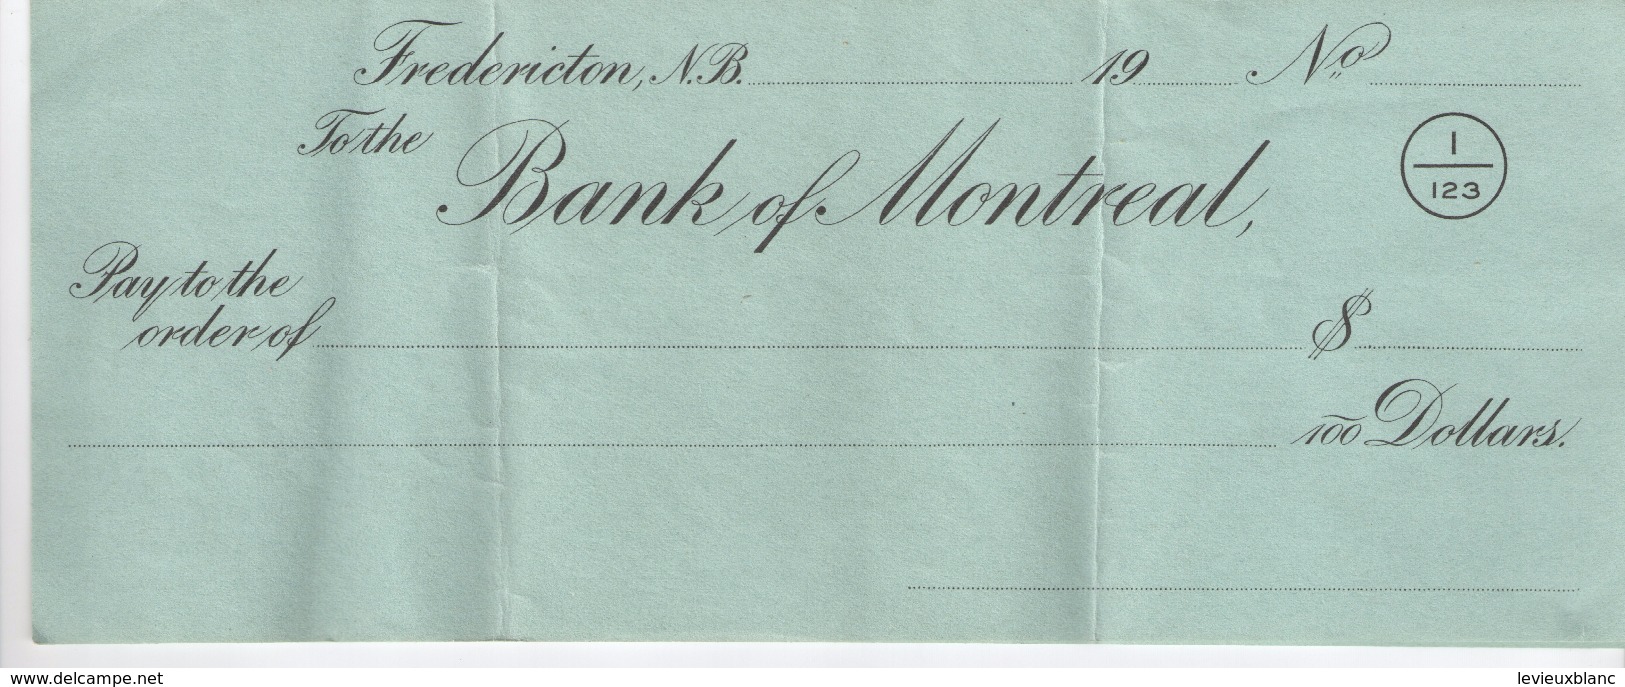 3 Chéques Bancaires/Bank Of Montreal/Fredericton/NB/100 Dollars/Sans Bénéficiaire/Vers 1950 ?      BA45 - Cheques En Traveller's Cheques